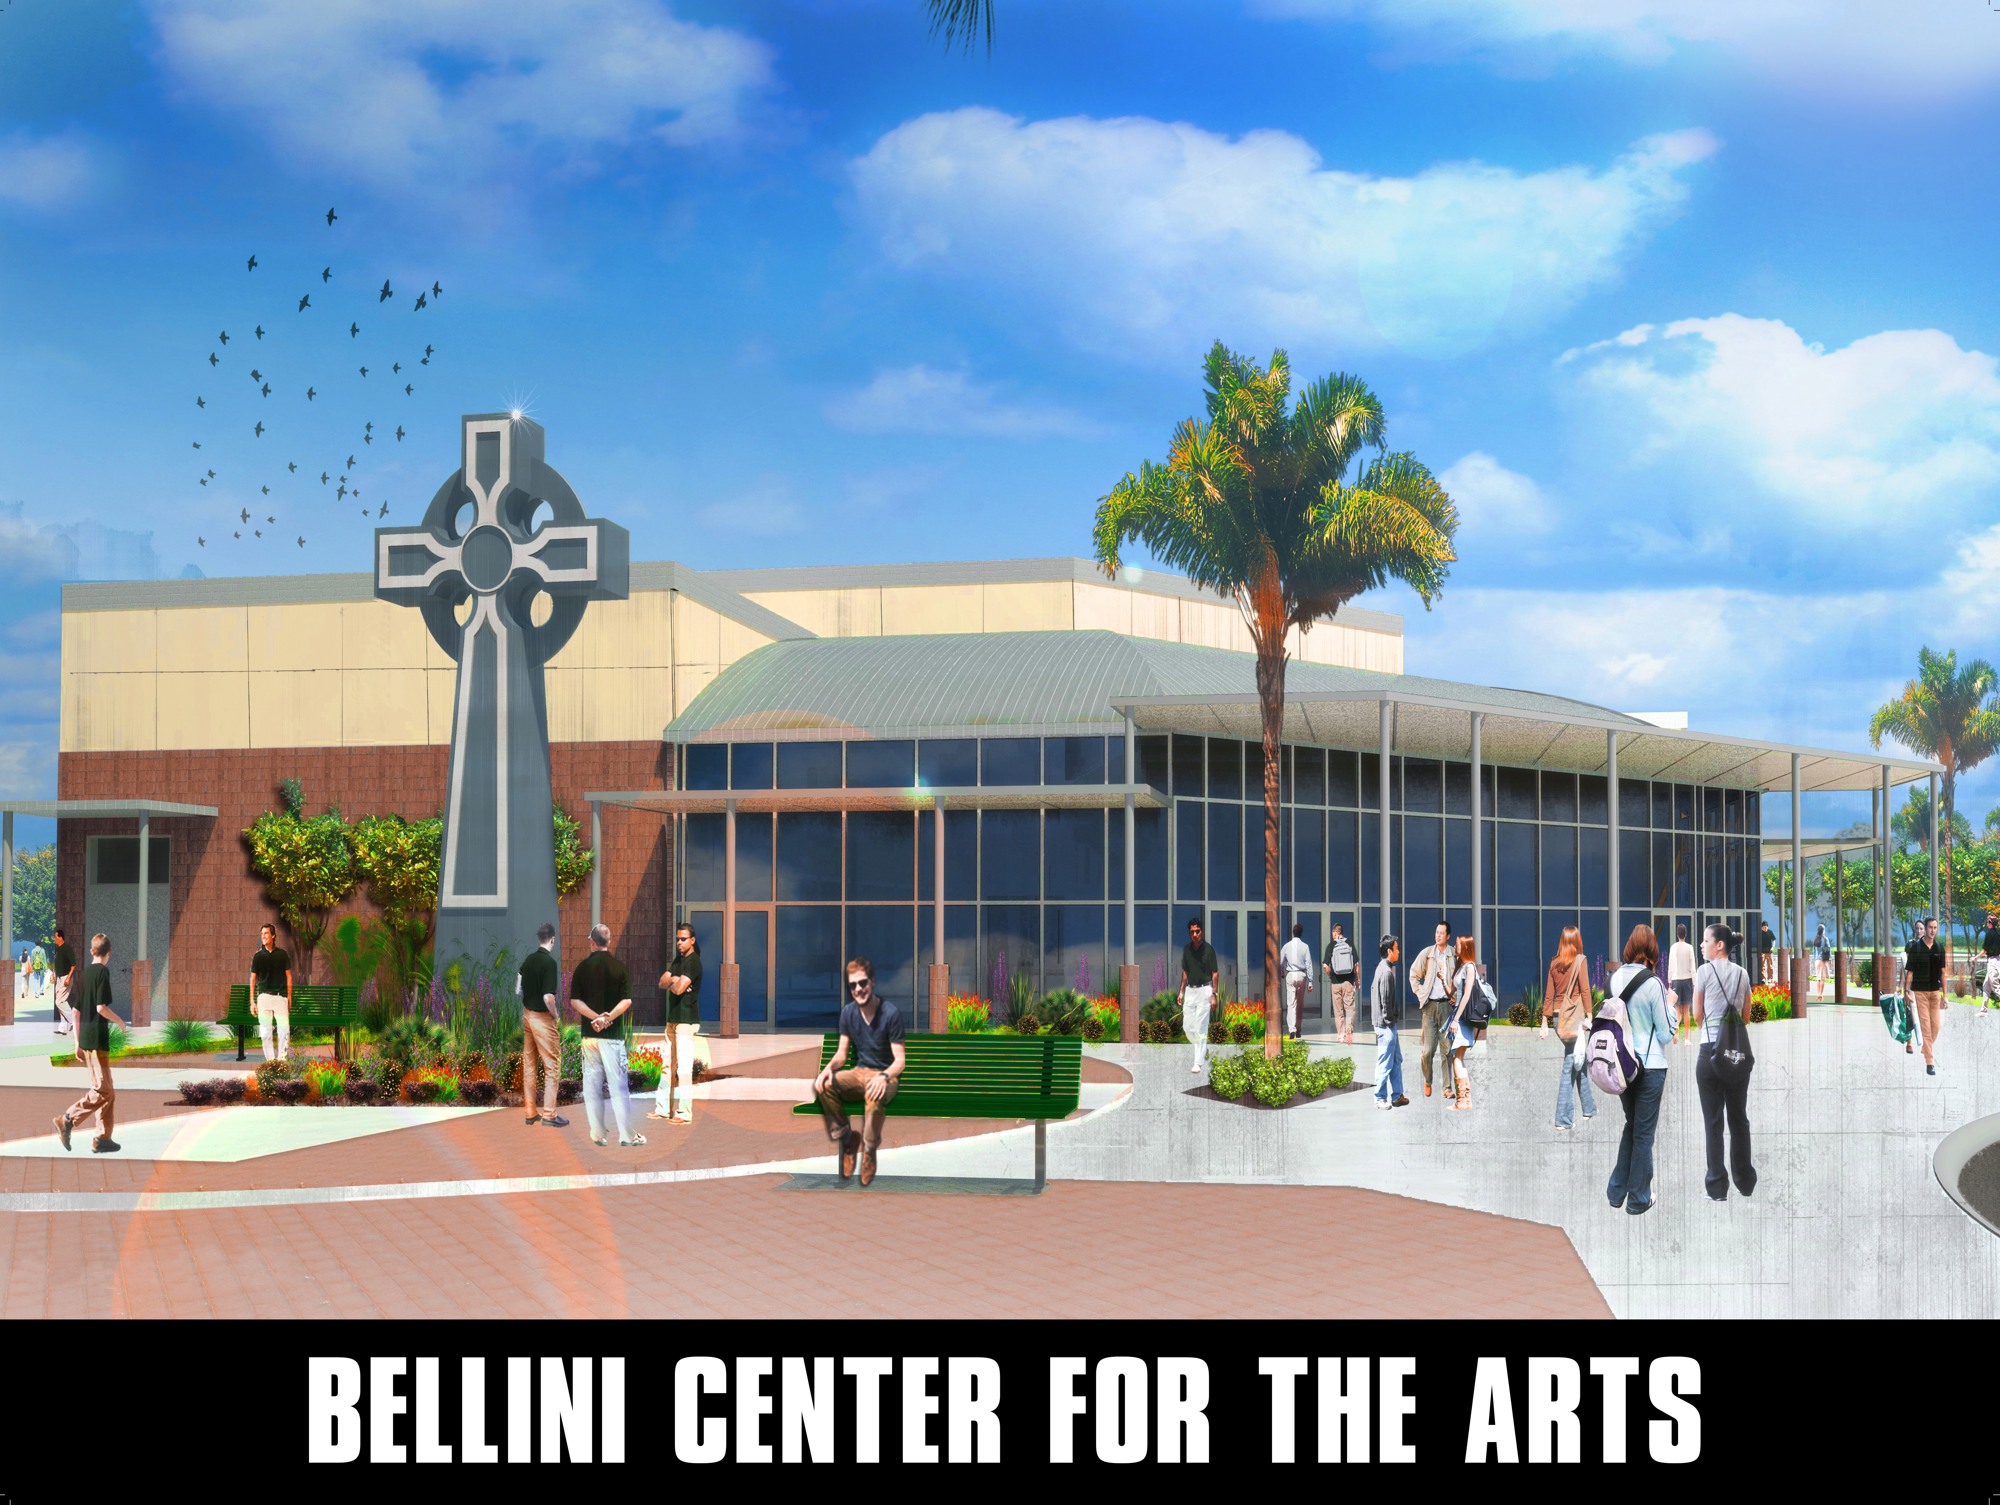 Arnie Bellini's $7 million gift will fund a new arts center at Tampa Catholic High School. Courtesy photo.